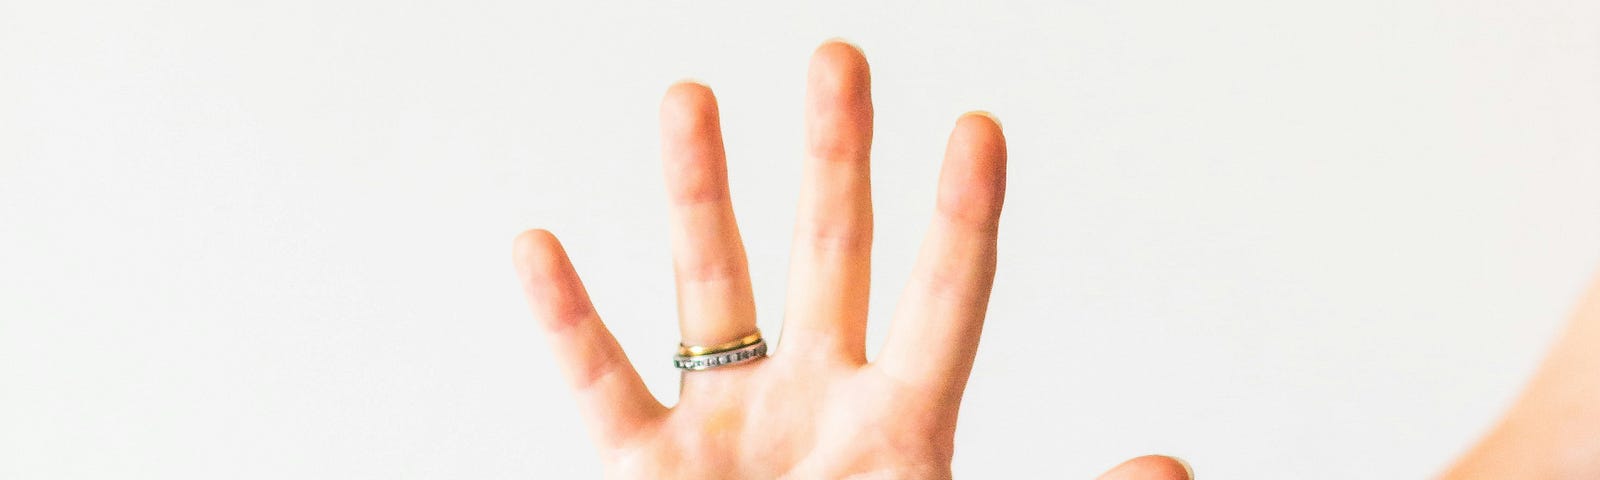 A hand is held up with all fingers spread, as if to say “five” or “that’s enough”. The person wears two thin bands on the fourth finger; one studded with diamonds, the other gold.